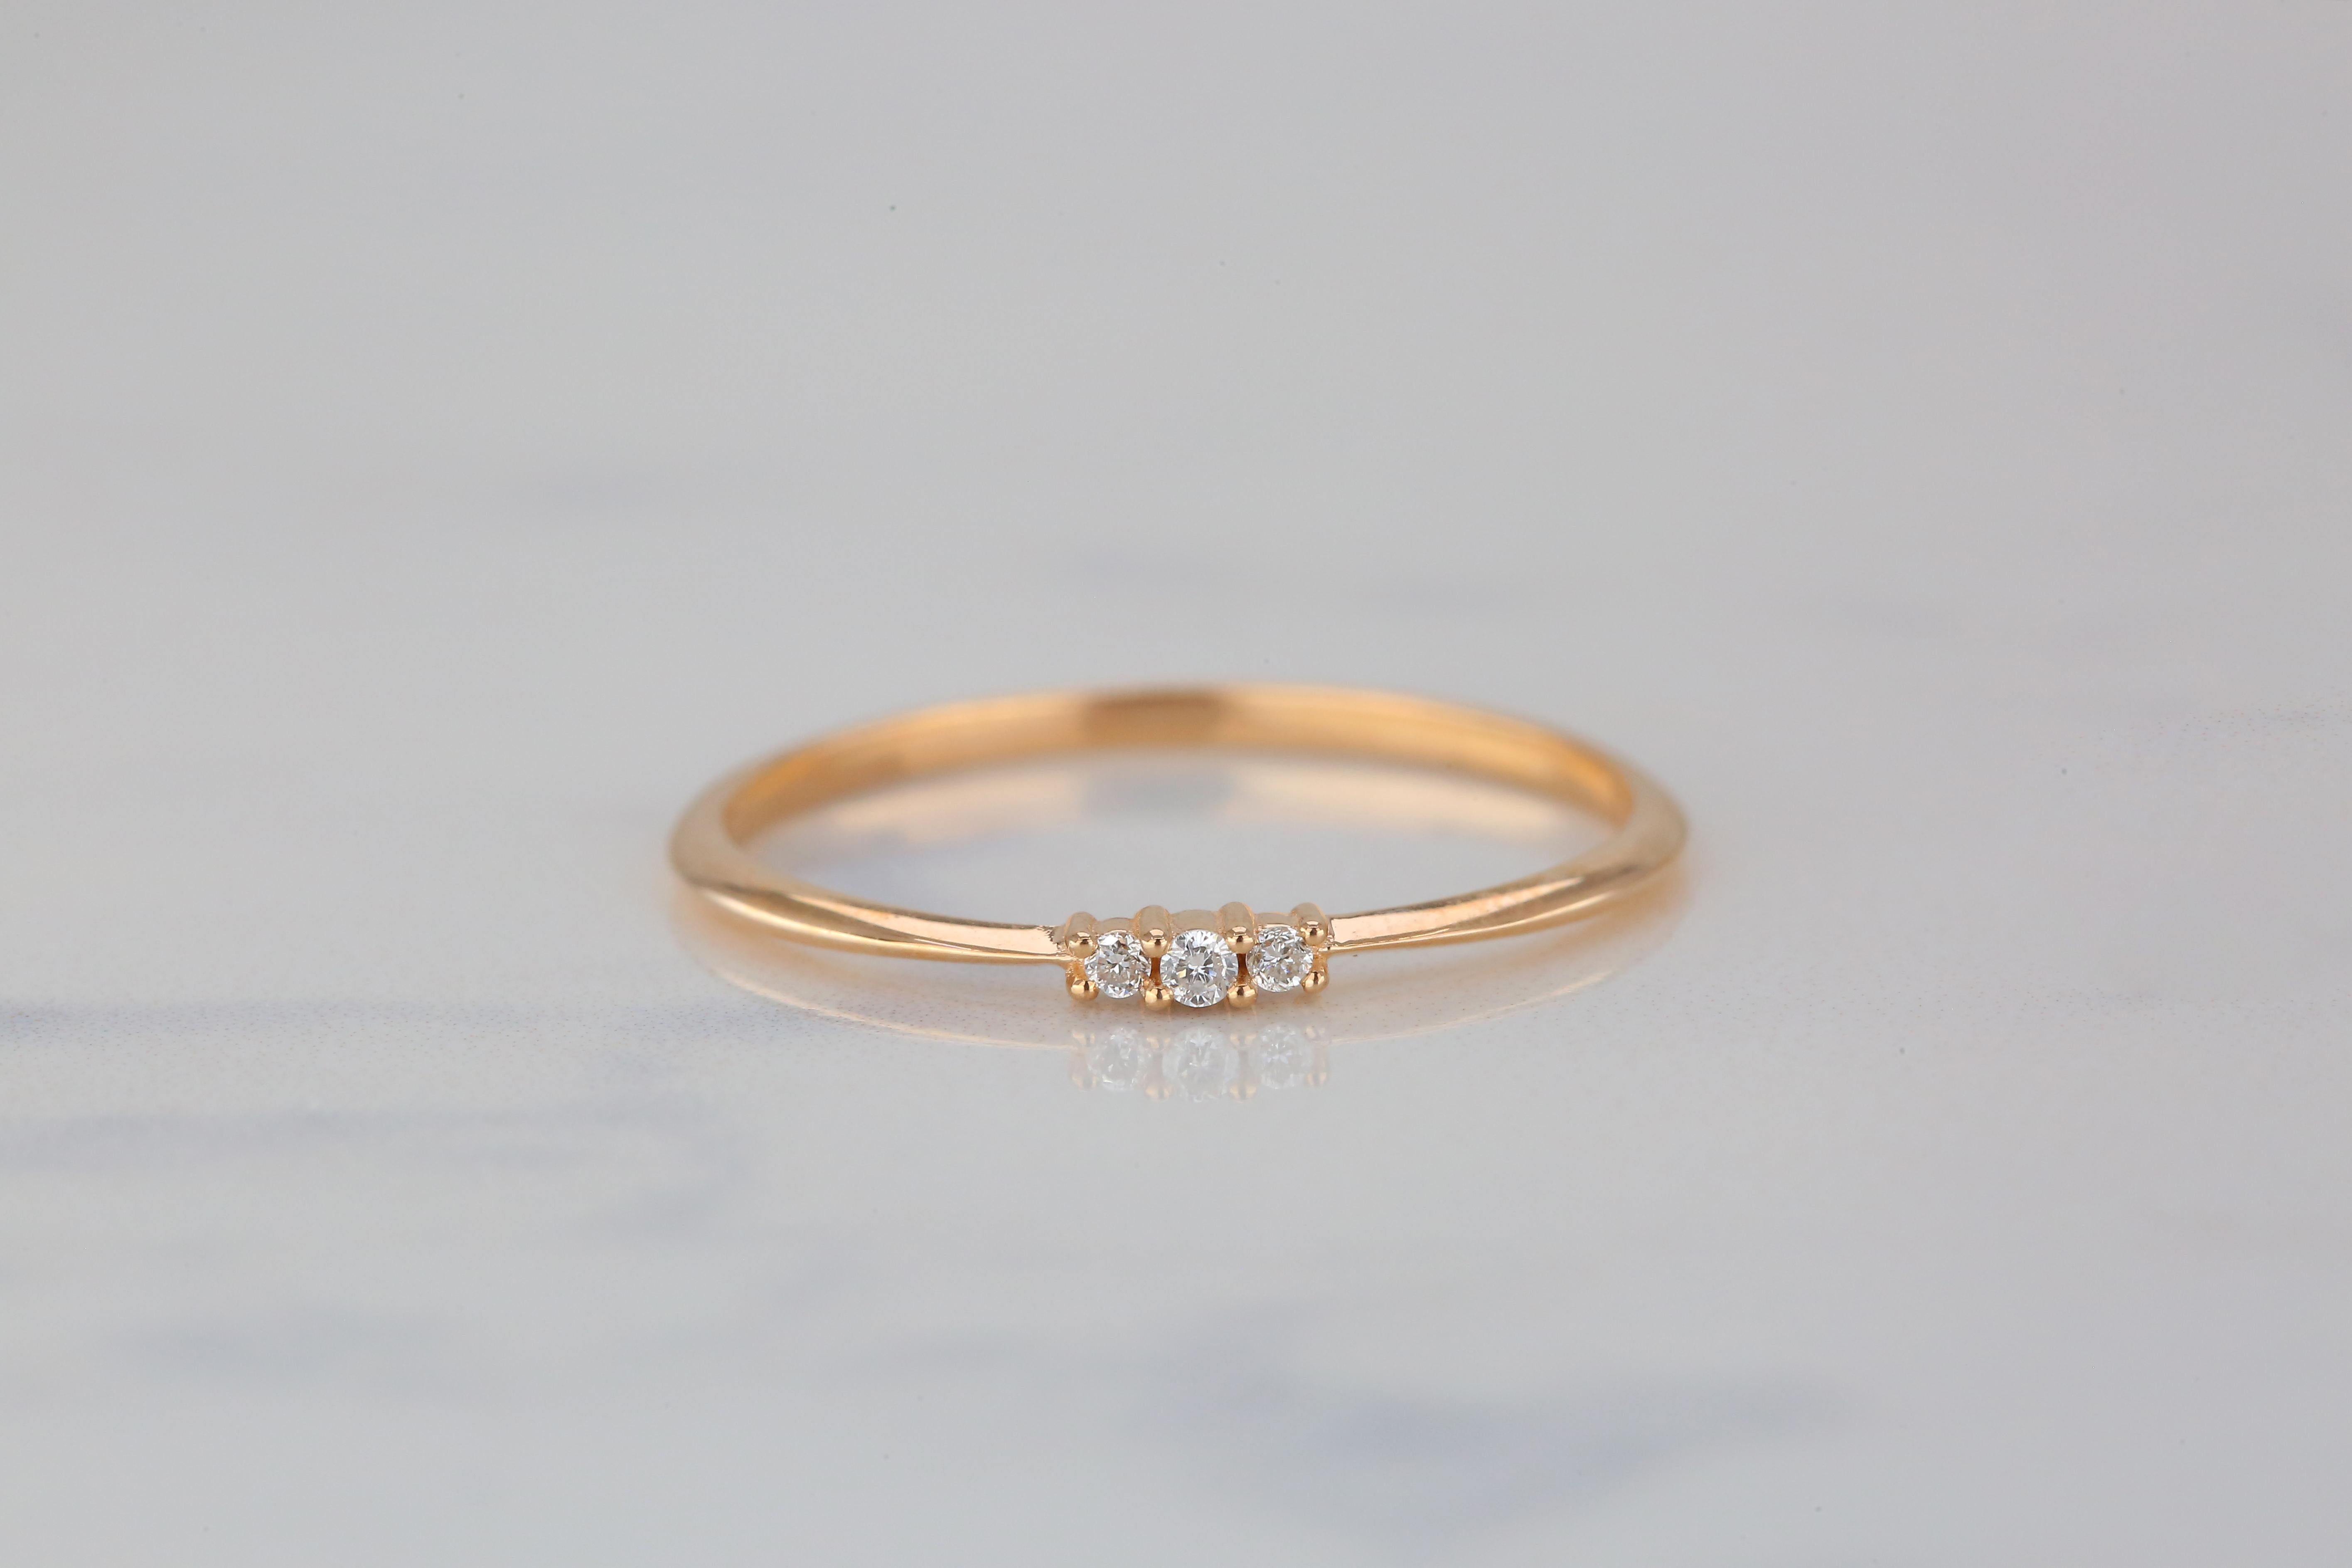 For Sale:  Round Diamond Trio Ring, 14k Solid Gold Ring, Dainty Ring, Minimalist Style Ring 7